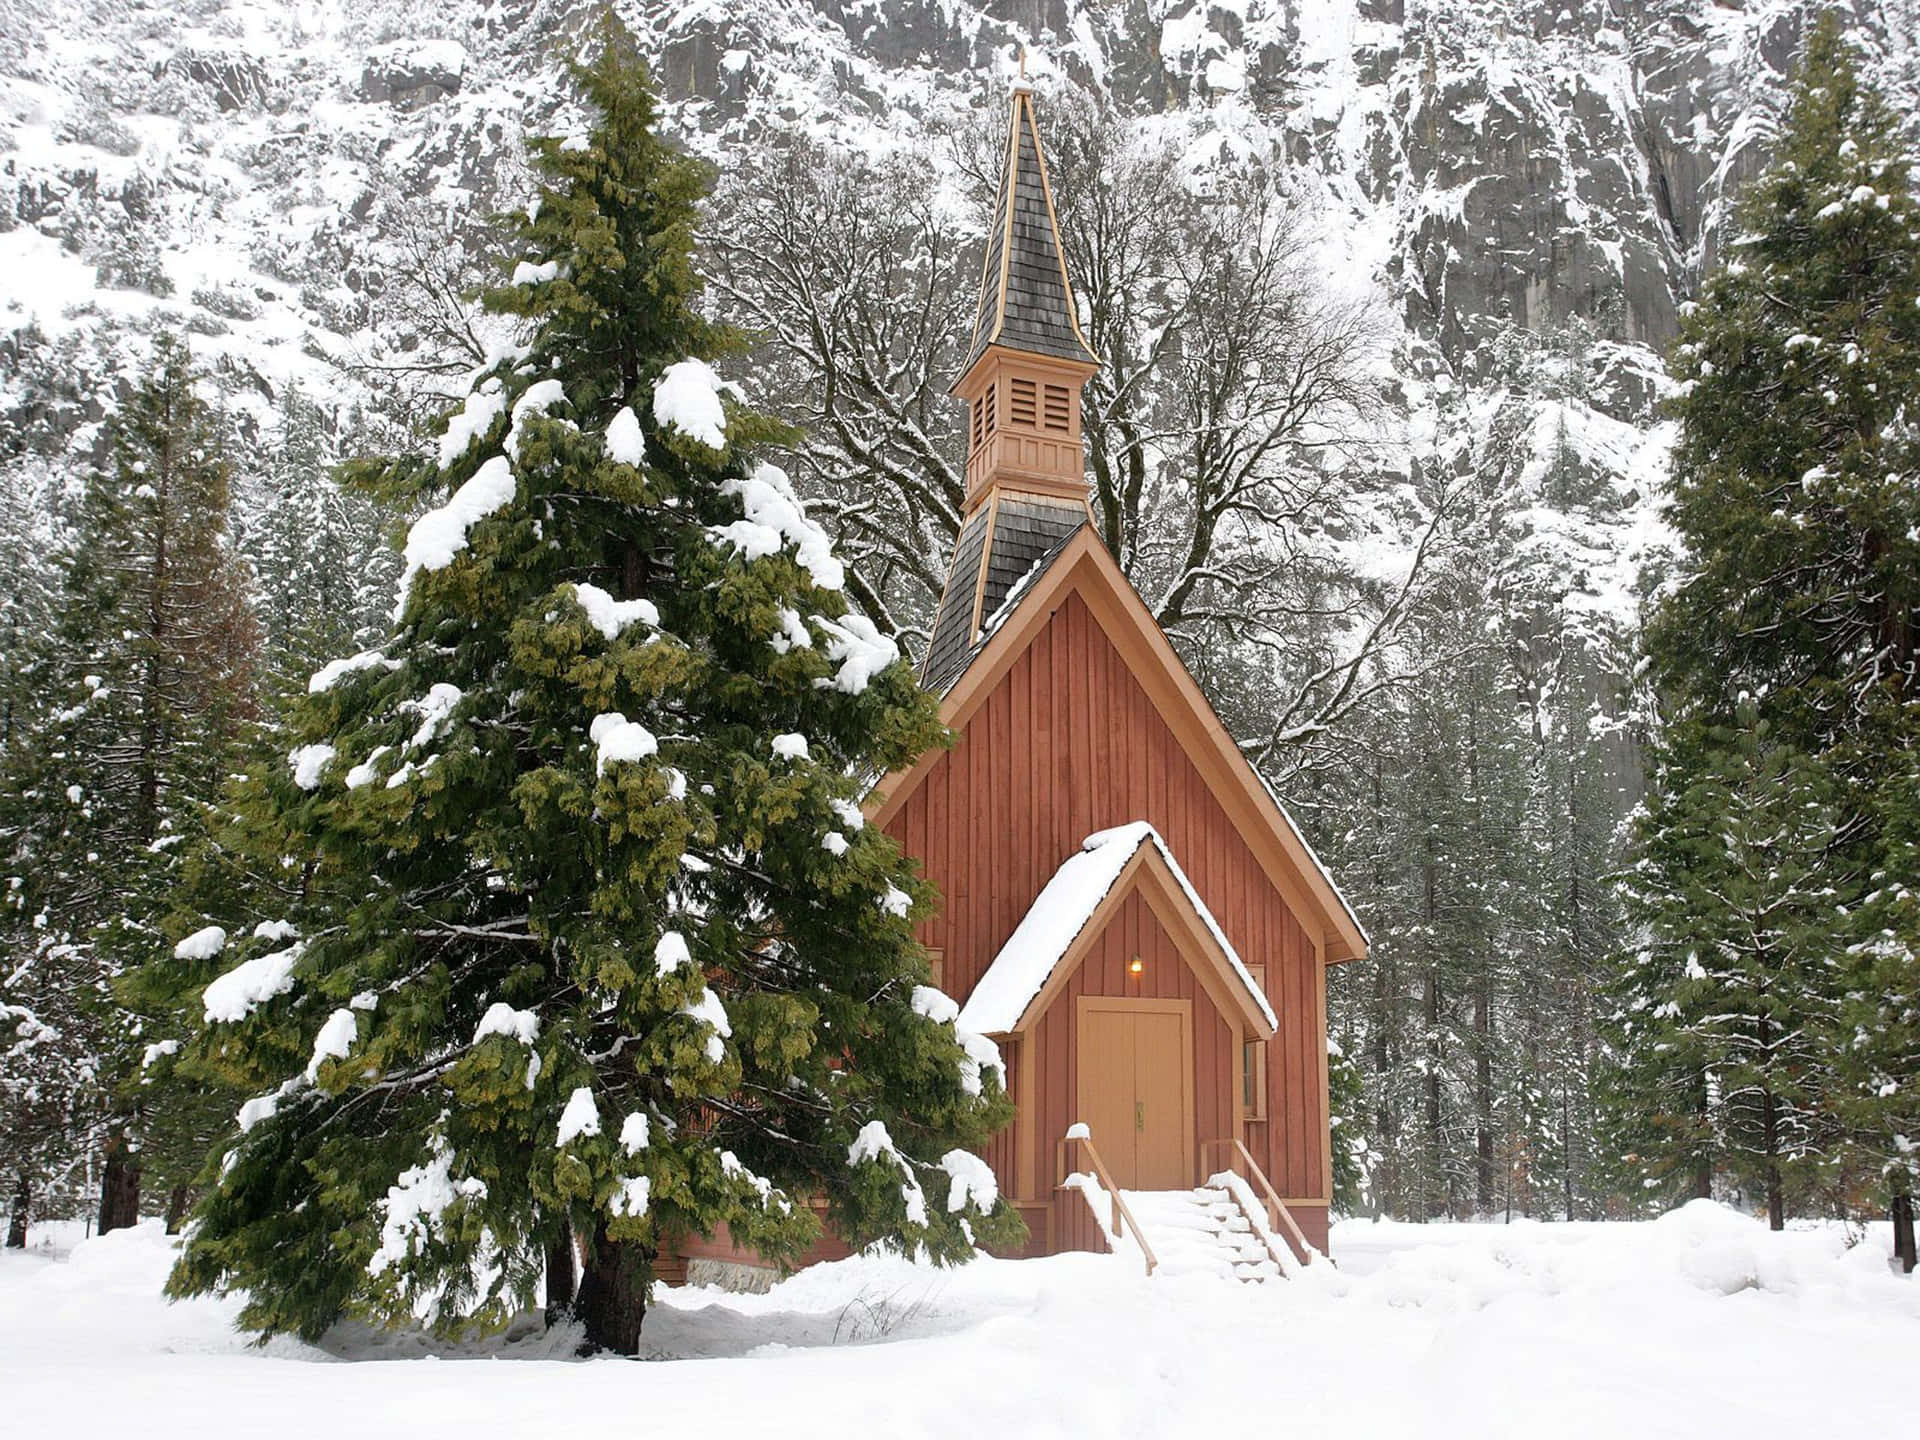 A Small Church In The Snow With Trees Surrounding It